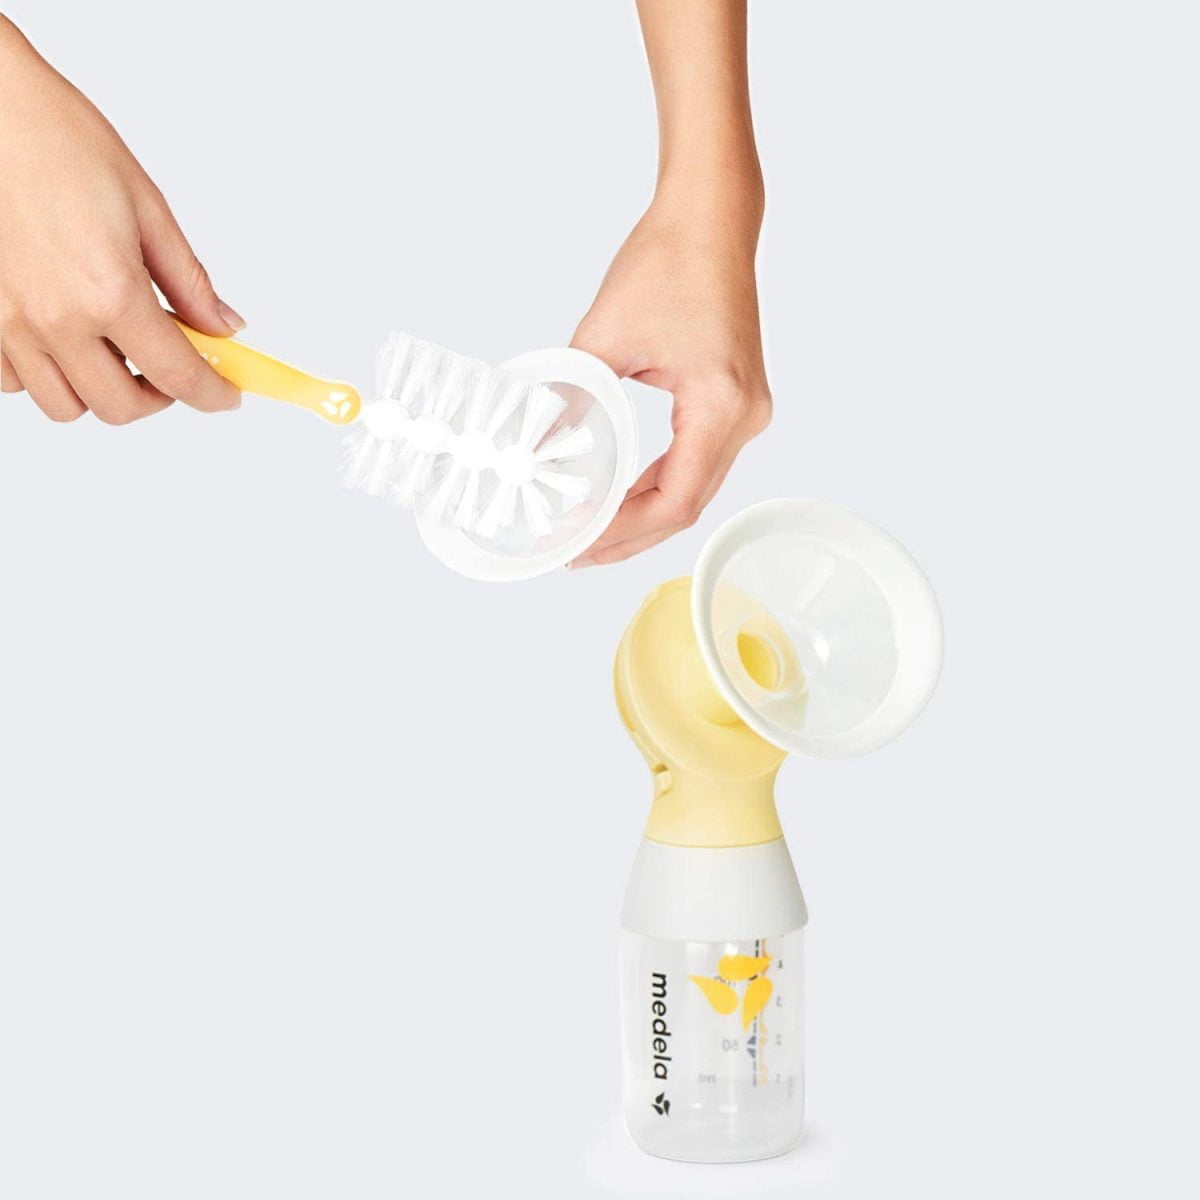 613Y9W4Kv5L. Ac Sl1500 Medela &Lt;H1 Class=&Quot;Mtop0&Quot;&Gt;Medela Swing Flex Breast Pump&Lt;/H1&Gt; Https://Www.youtube.com/Watch?V=Cz6Aqdjjbdw Medela Swingflex Single Electric Breast Pump Is Infused With Patented And Research-Based 2-Phase Expression Technology. Through Research, Medela Has Learned That There Are Two Distinct Phases Of How Babies Breastfeed. The First Phase, Known As The Stimulation Phase Is When The Baby First Goes To The Breast And Sucks Fast To Initiate The Milk Flow. The Second Phase Of Expression Occurs After Milk Flow Or Let-Down Begins. During This Phase, The Baby Breastfeeds At A Slower Suck Rate For Continued Milk Flow. &Lt;Pre&Gt;&Lt;B&Gt;We Also Provide International Wholesale And Retail Shipping To All Gcc Countries: Saudi Arabia, Qatar, Oman, Kuwait, Bahrain. &Lt;/B&Gt; &Lt;B&Gt;Warranty: Pump - 1 Year, Battery - 6 Months&Lt;/B&Gt;&Lt;/Pre&Gt; Breast Pump Medela Swing Flex Breast Pump